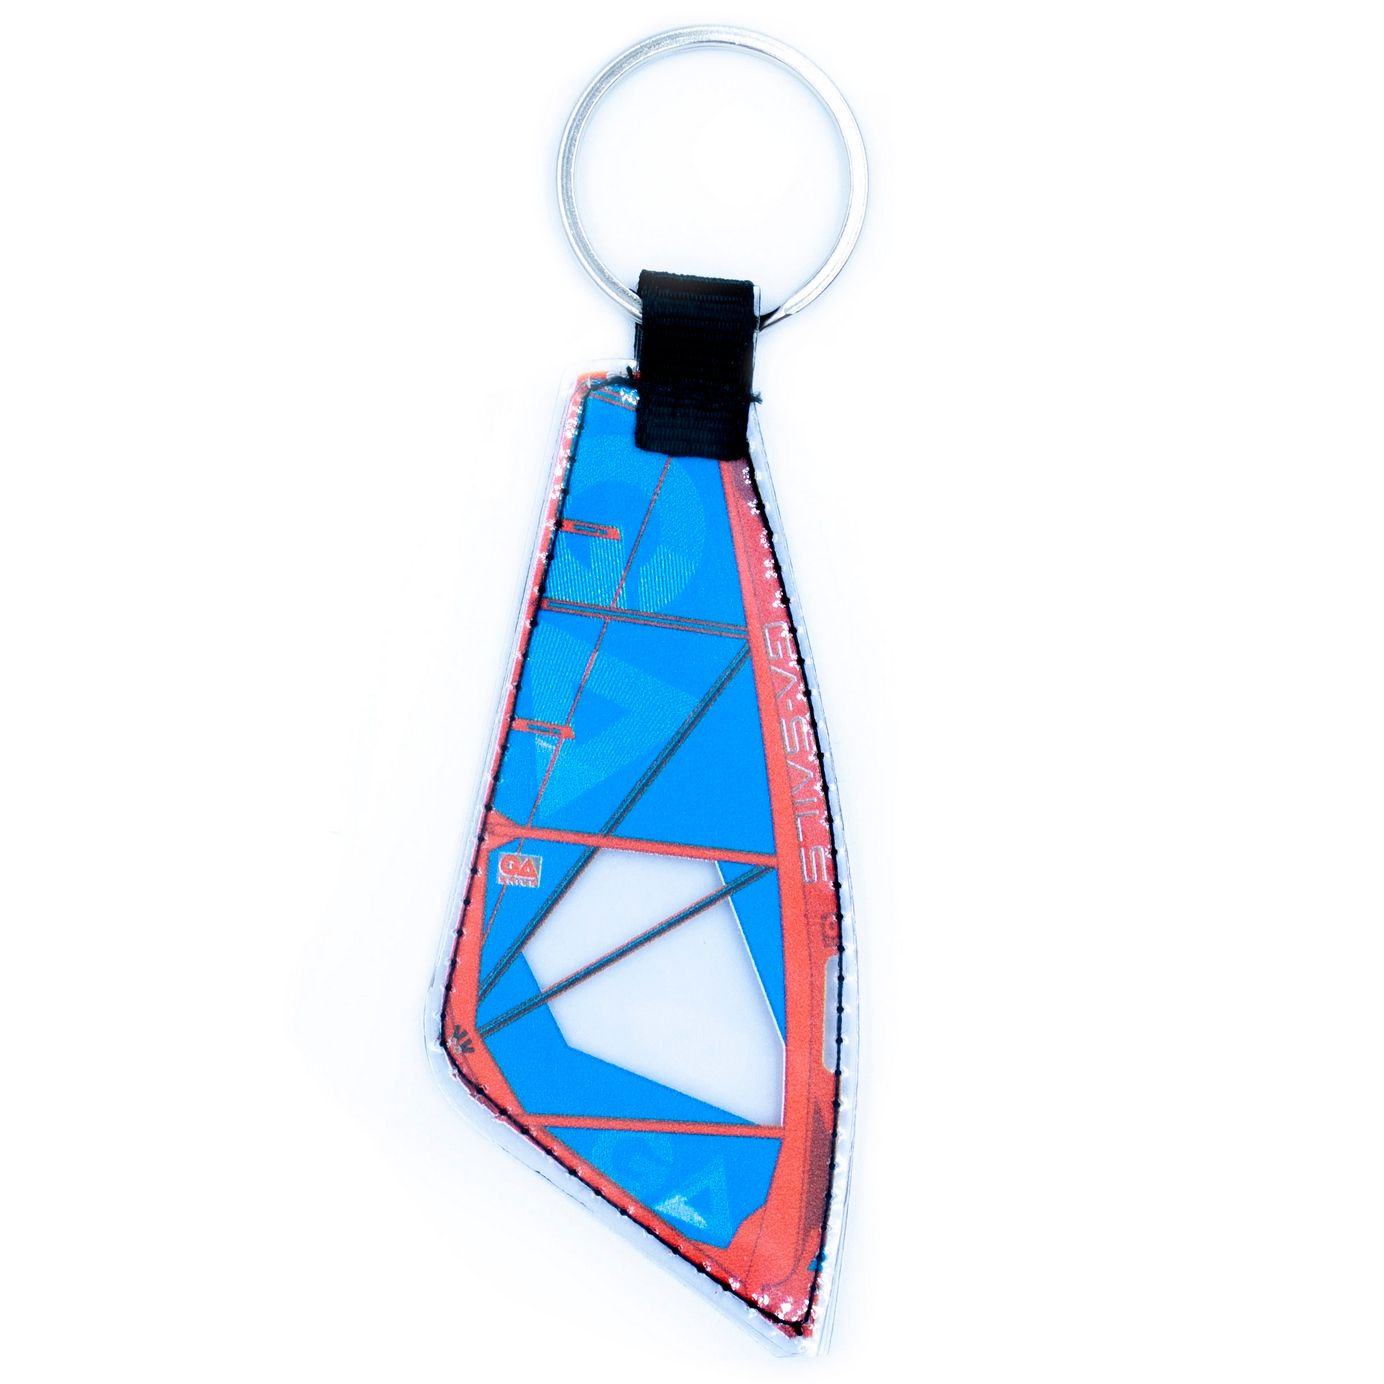 Windsurfing Sail Keychain flexible sail in real sail shape and colours. 